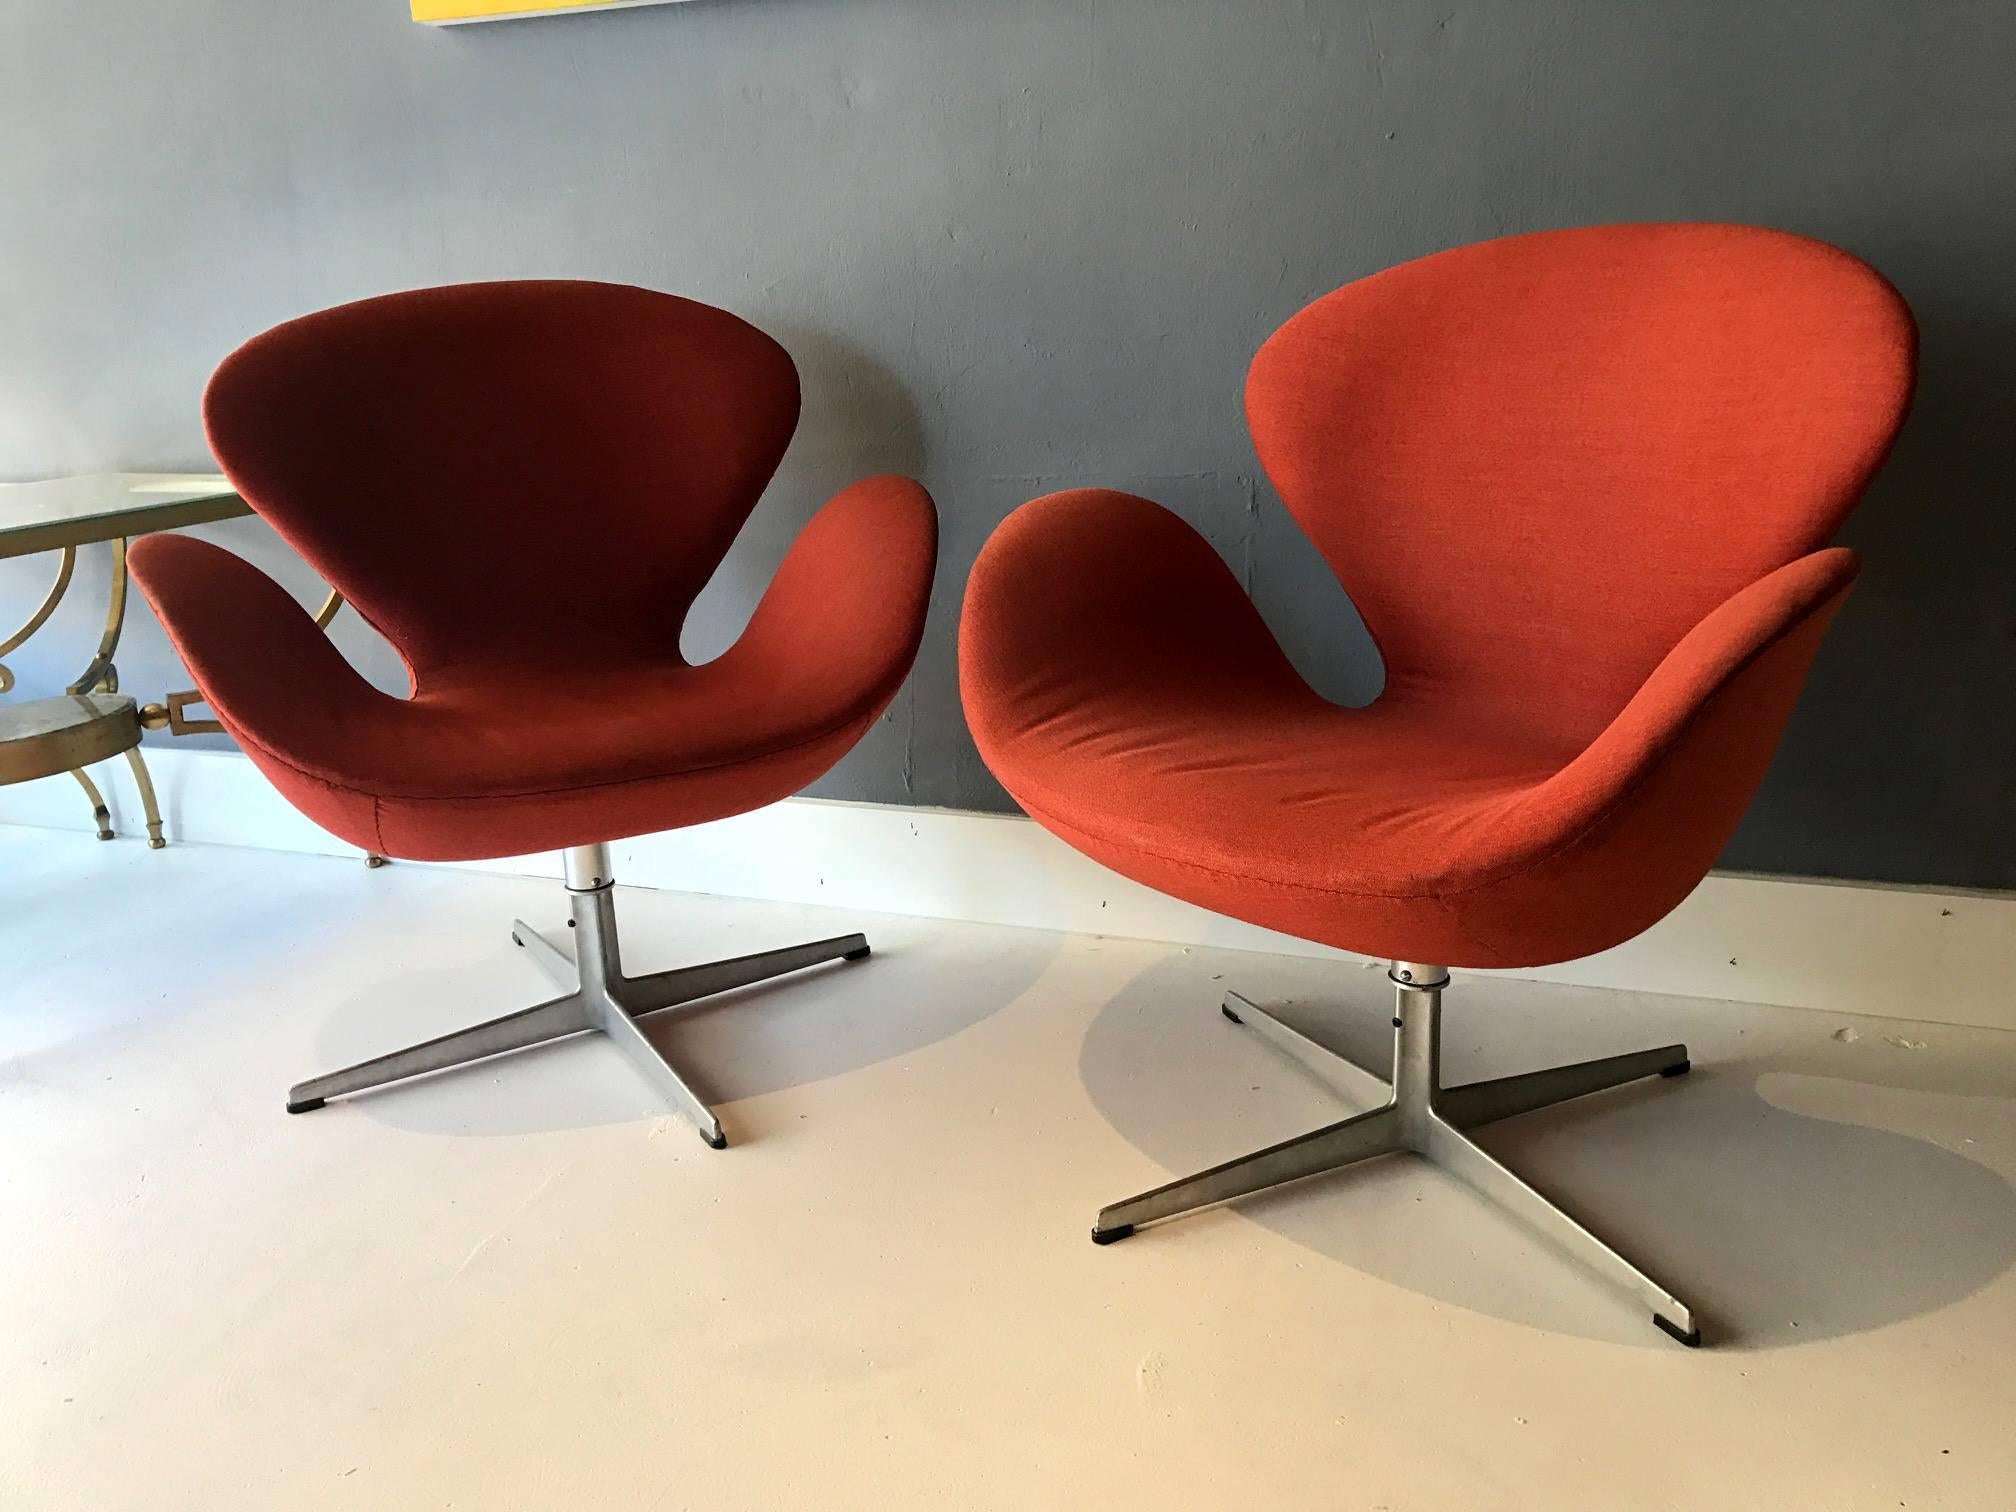 A pair of vintage swan chairs designed by Arne Jacobsen for Fritz Hansen. Iconic design with comfort and practicality. Earlier production by Fritz Hansen with brand mark and series number stamped on the base. Both swivel and upholstered in a